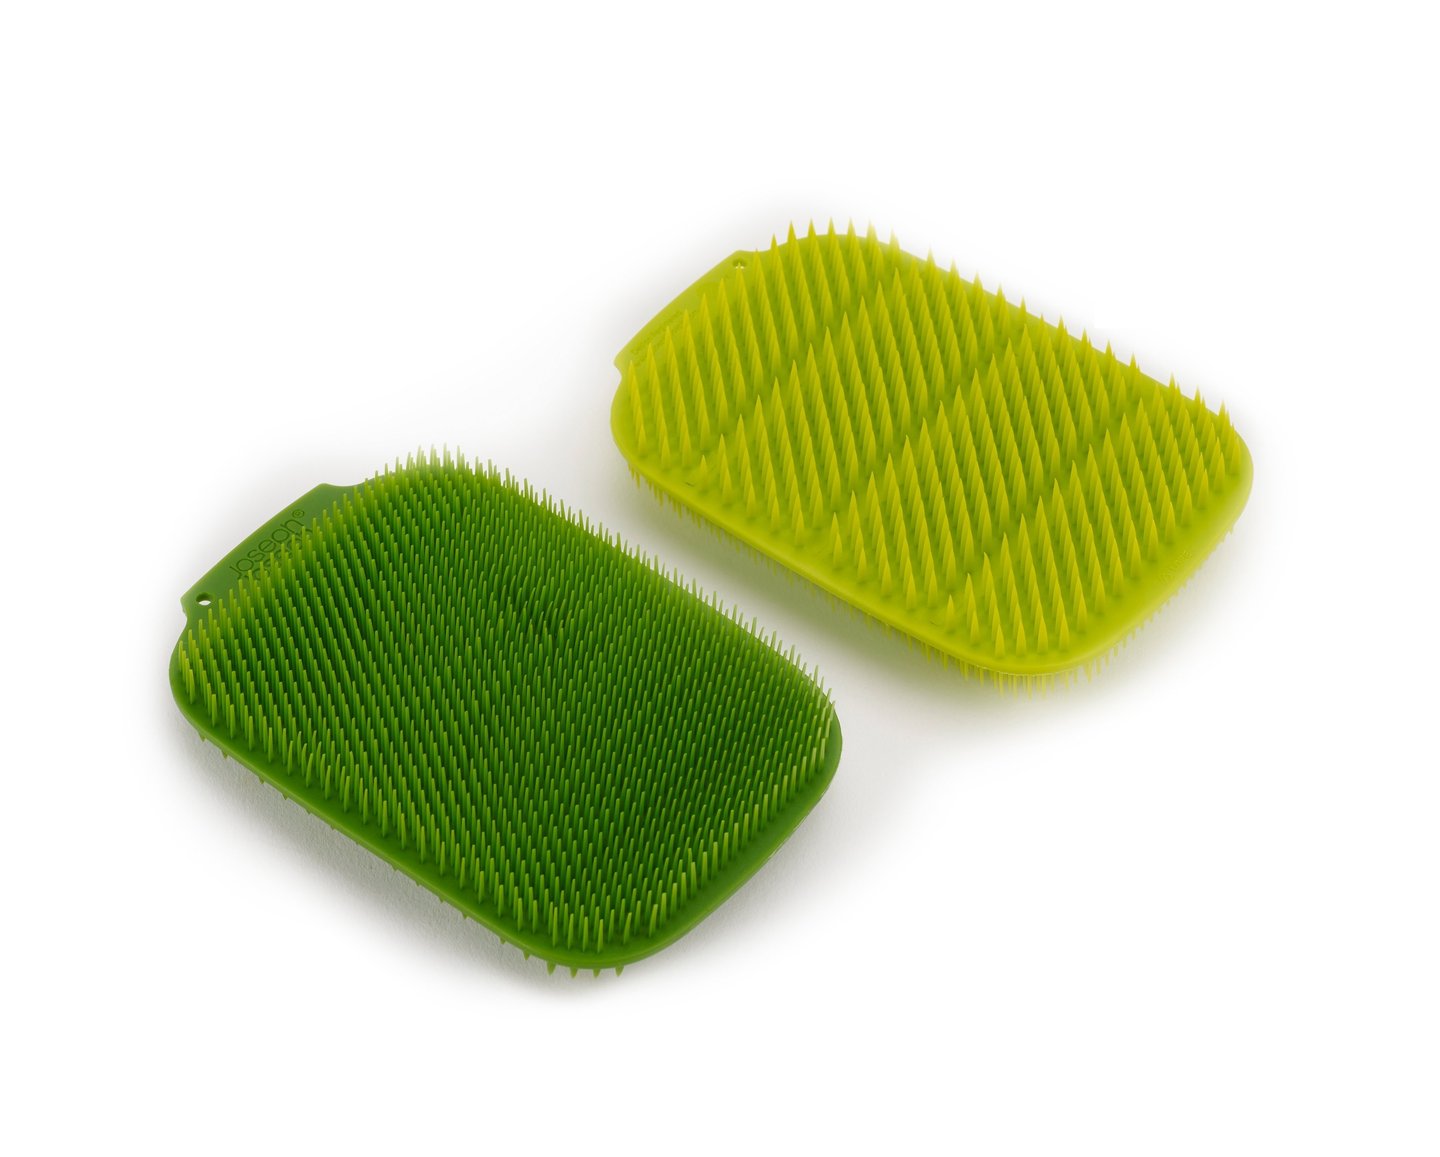 CleanTech Washing-up Scrubber(2-pack) by Joseph Joseph